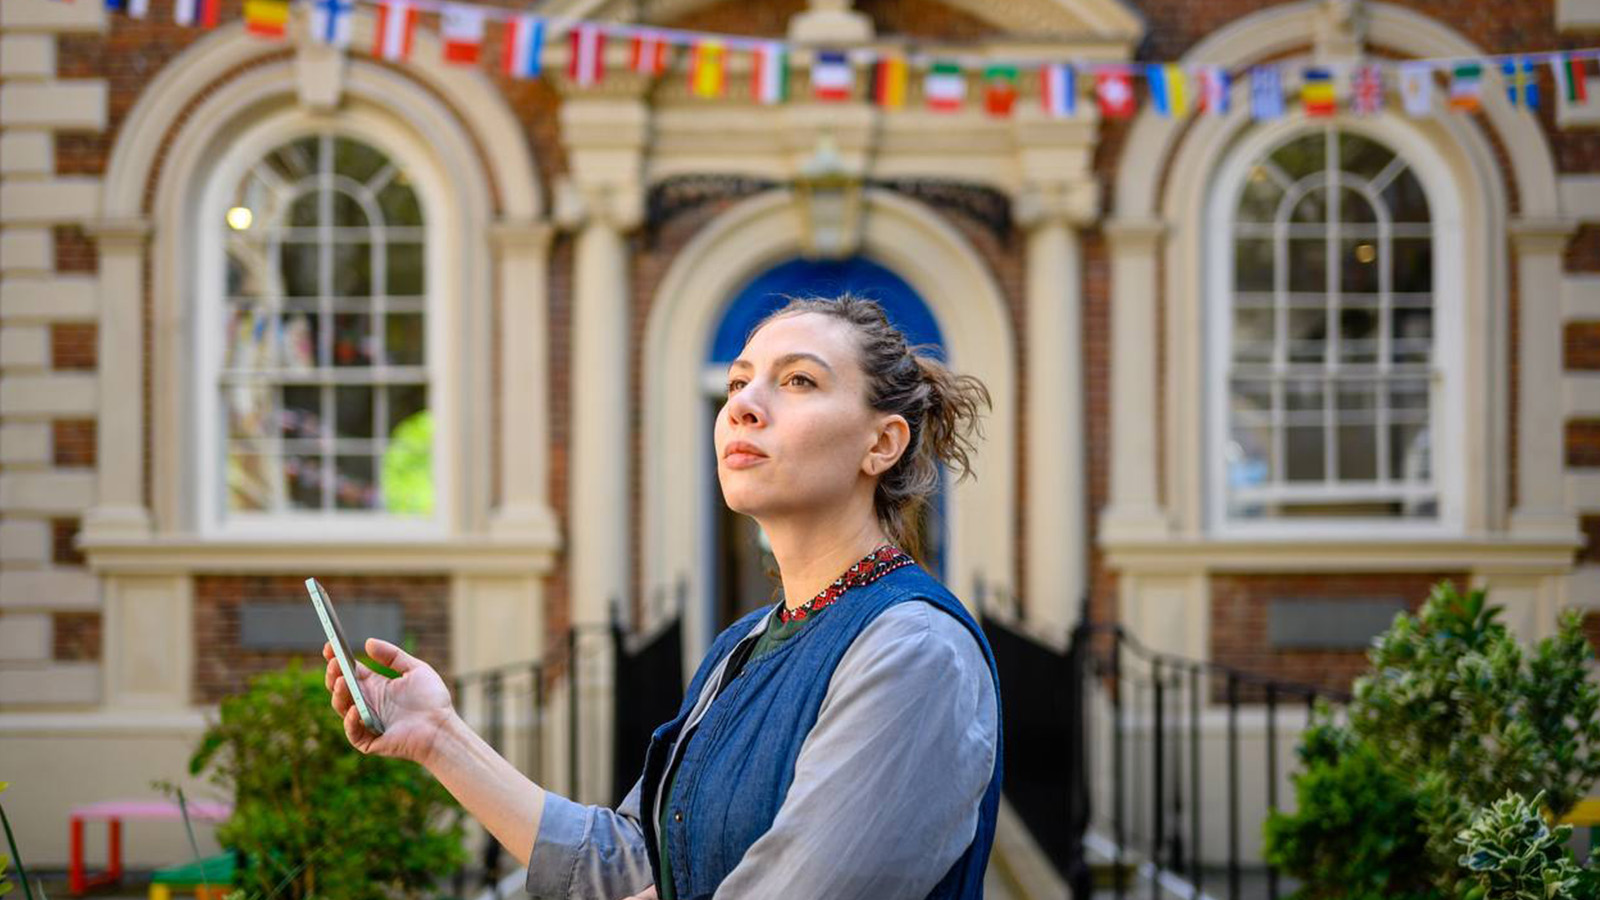 A woman (Veronika Skliarova) holds a smartphone in her hand while looking off into the distance. Behind her is an old brick and stone building with flags of the European nations suspended above the door.